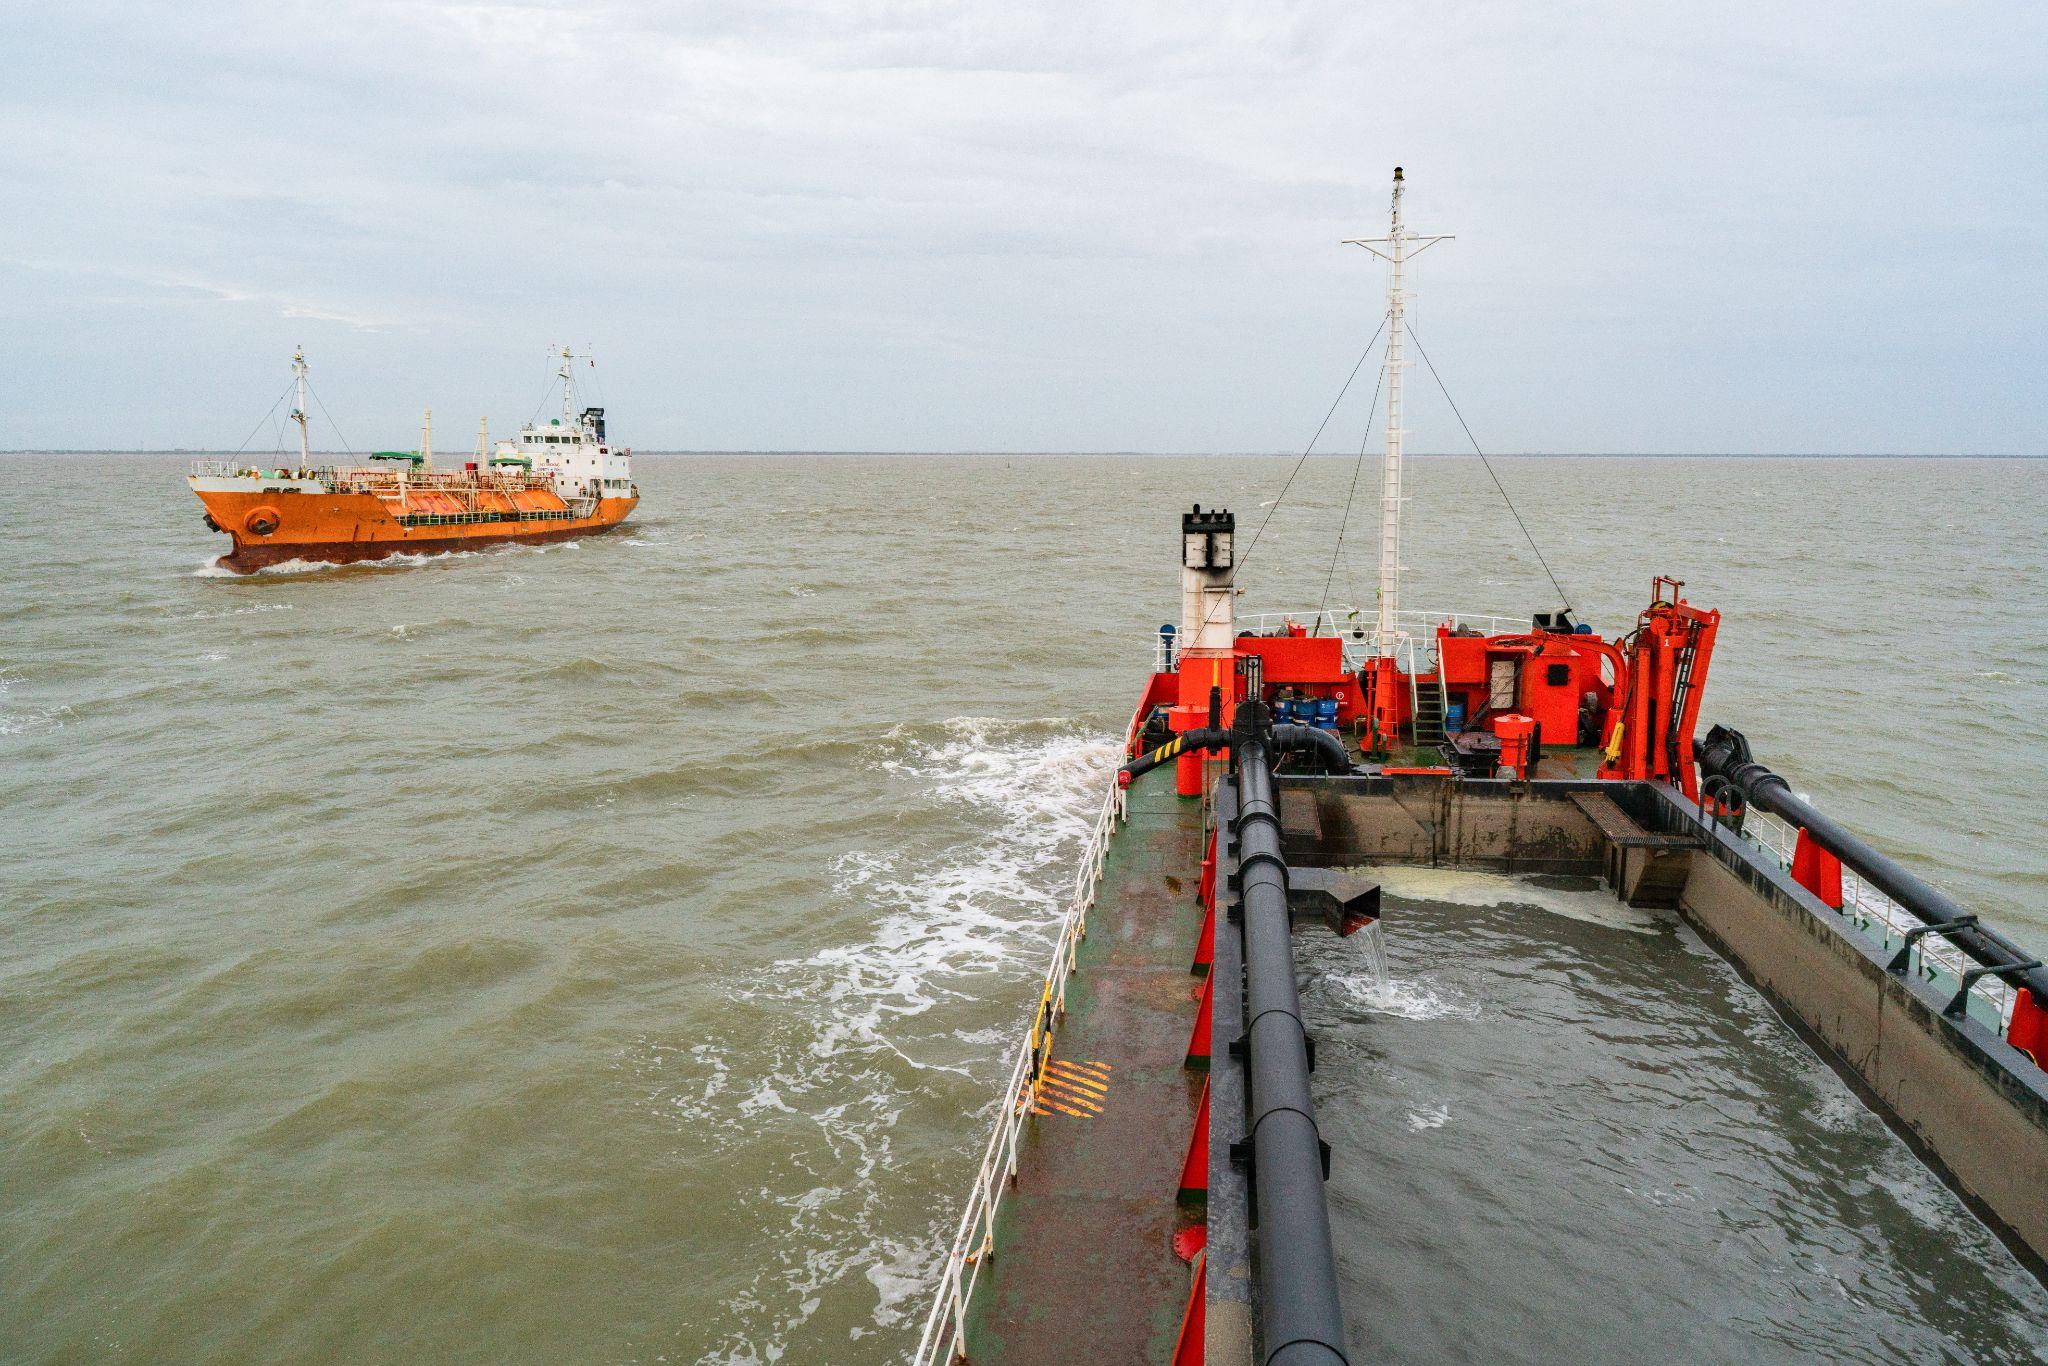 A Trailing Suction Hopper Dredger (TSHD) is mainly used for dredging loose and soft soils such as sand, gravel, silt or clay.